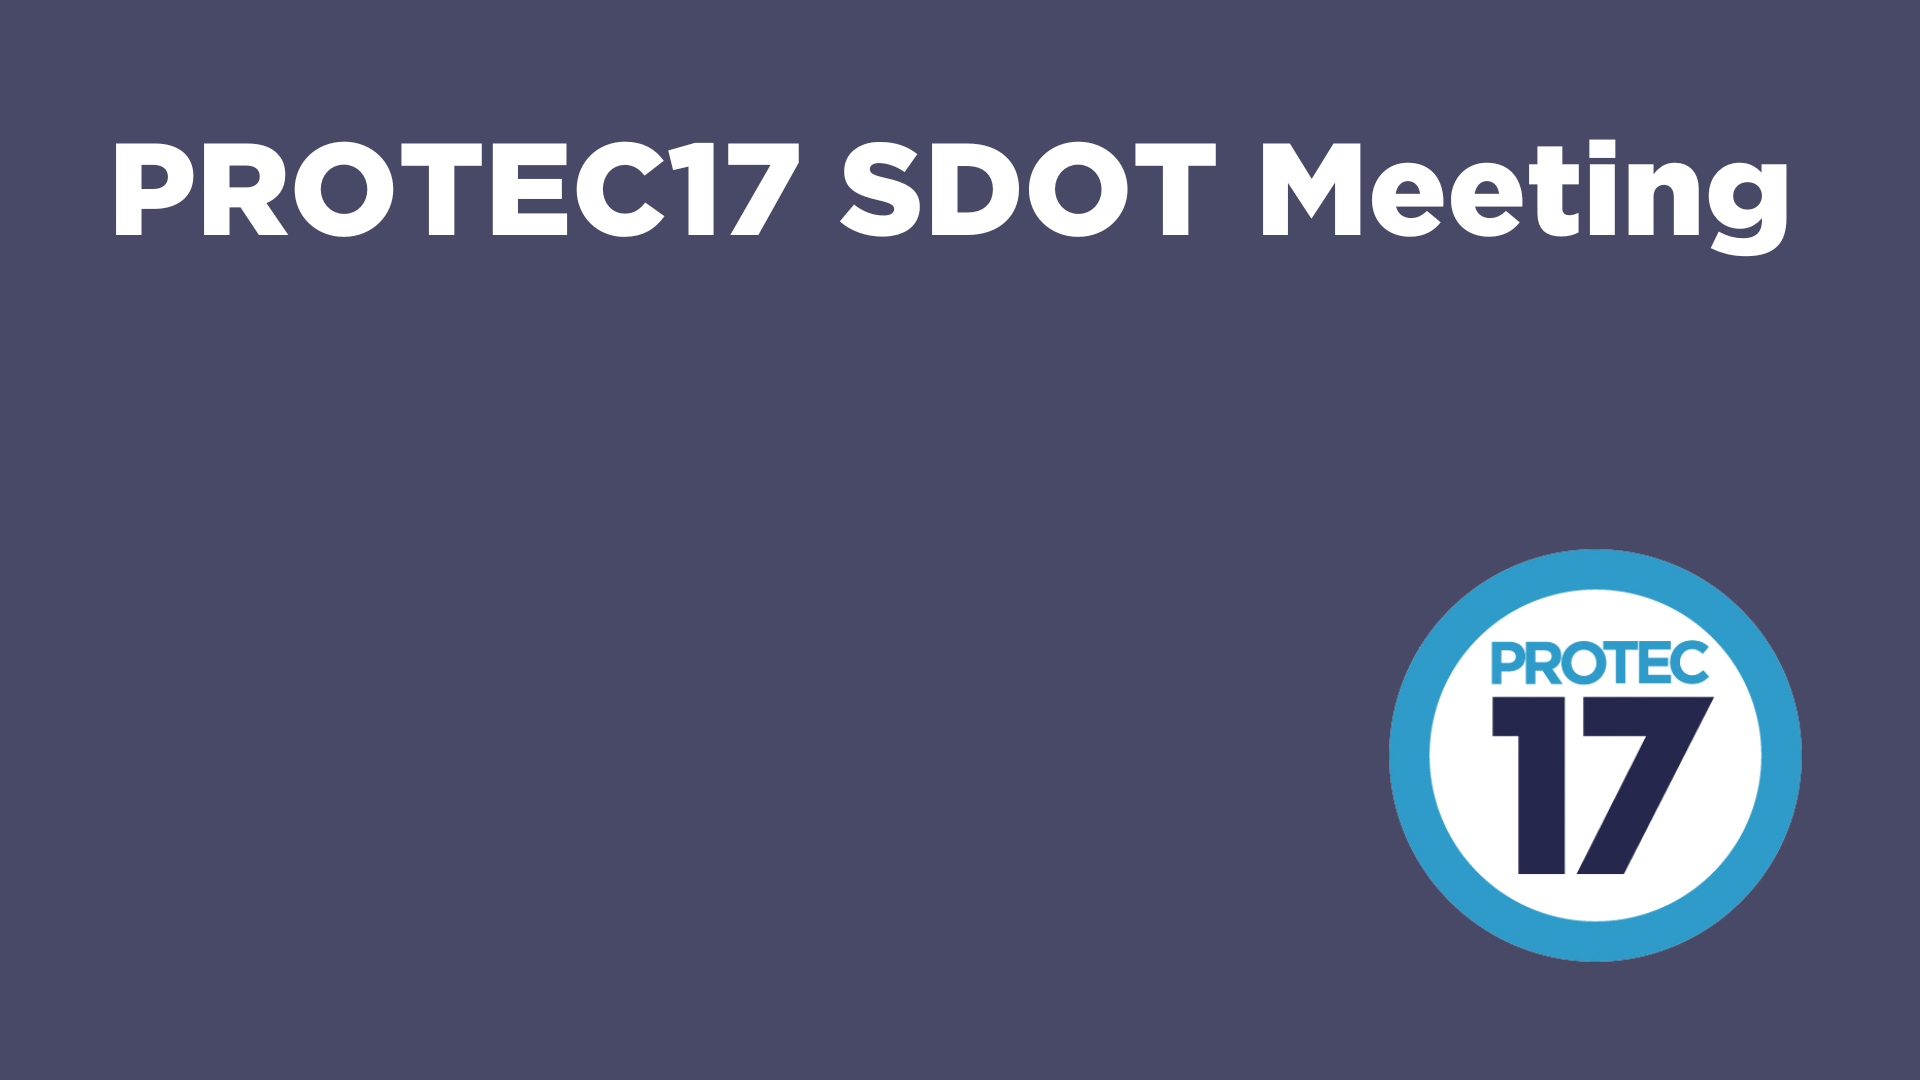 Text reads, "PROTEC17 SDOT Meeting" The PROTEC17 logo is in the bottom right.